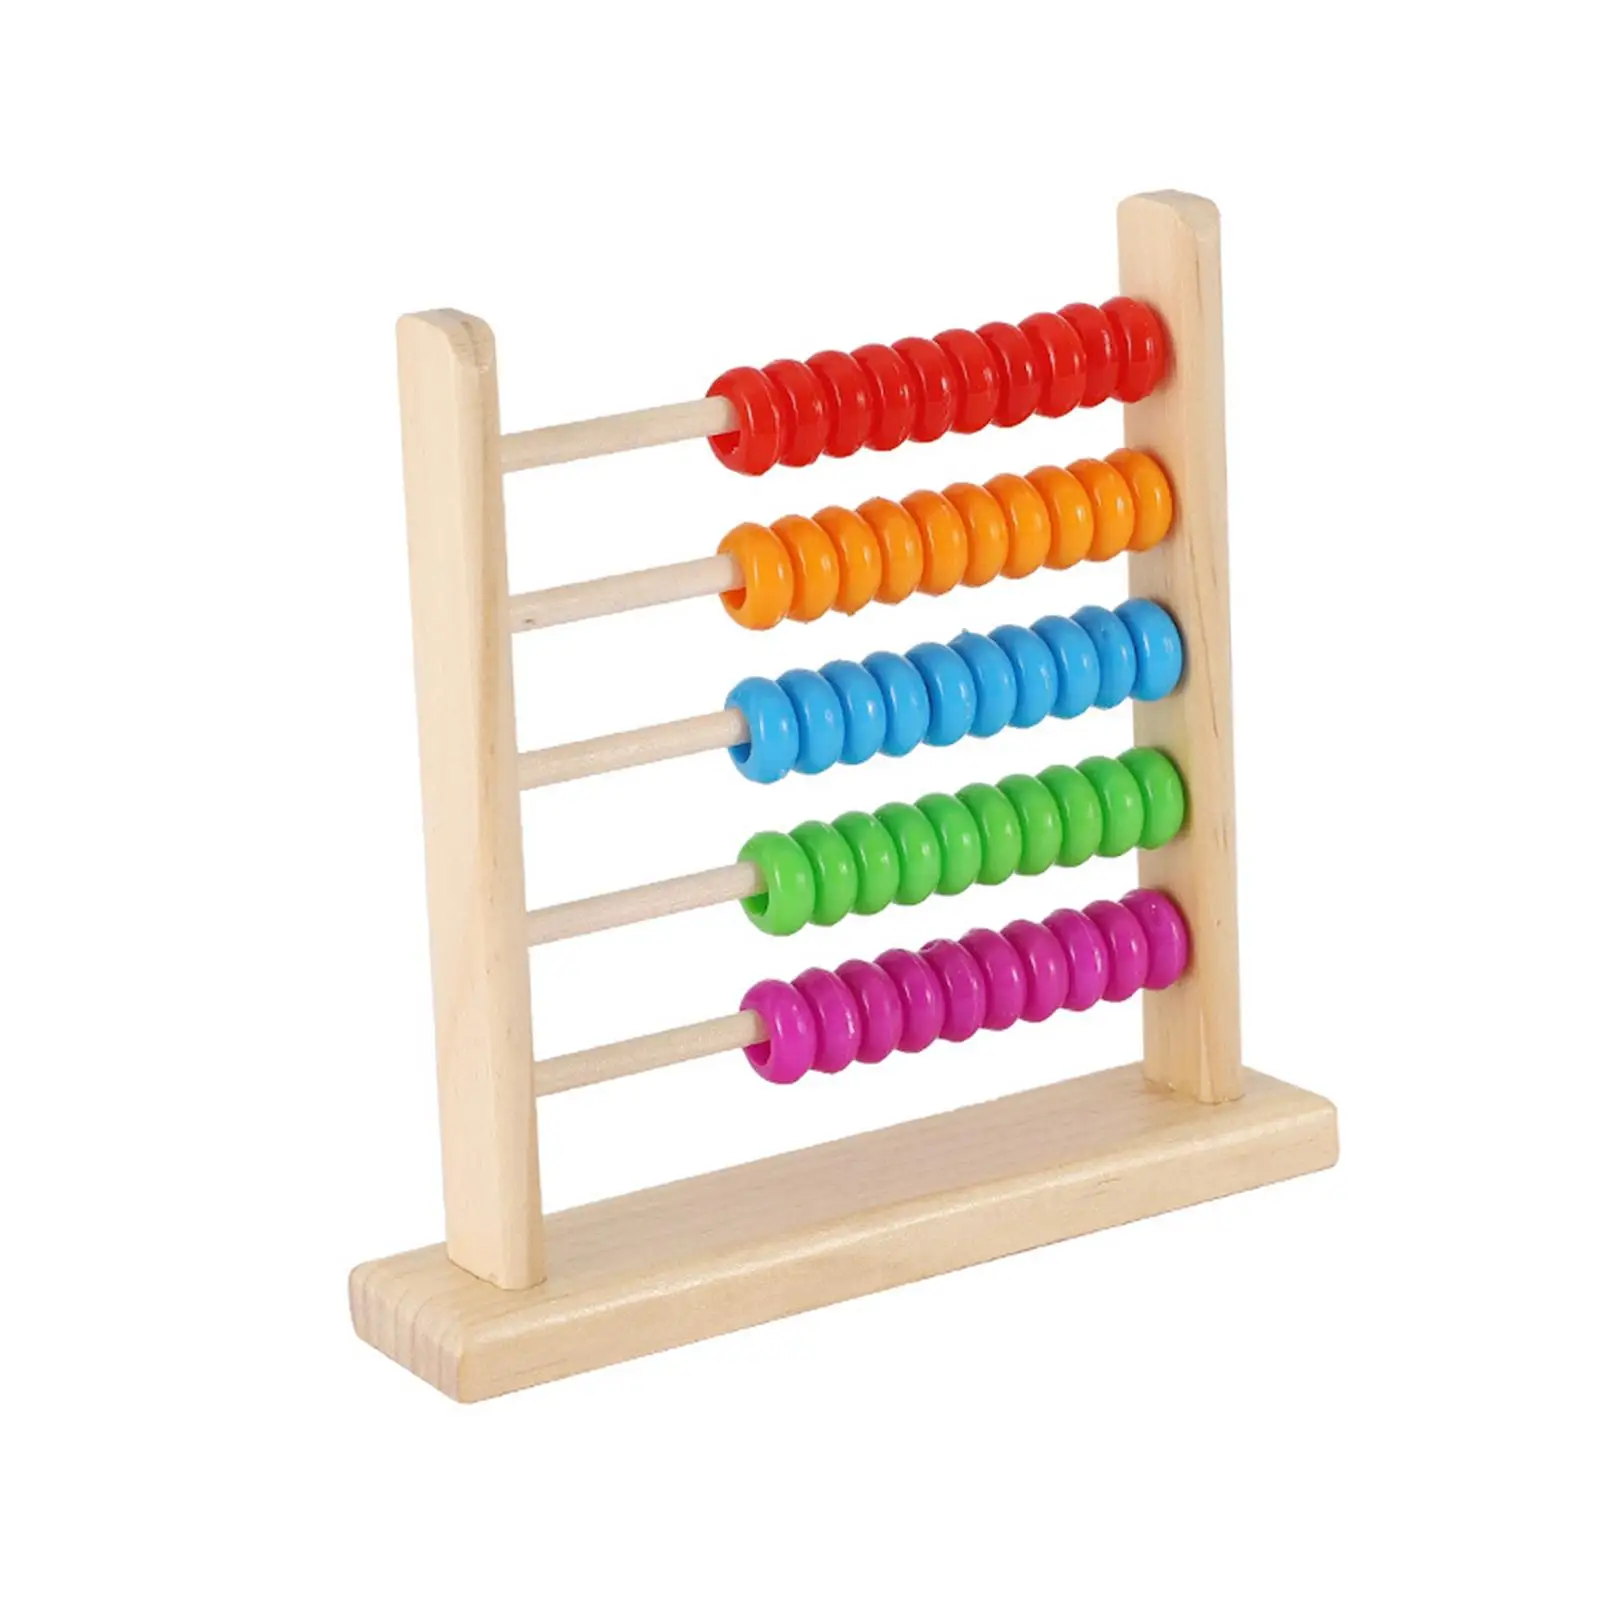 Counting Abacus Toy Learning Math Colorful Beads Educational Toy Counting Frame Educational Toy for Children Preschool Kids Baby